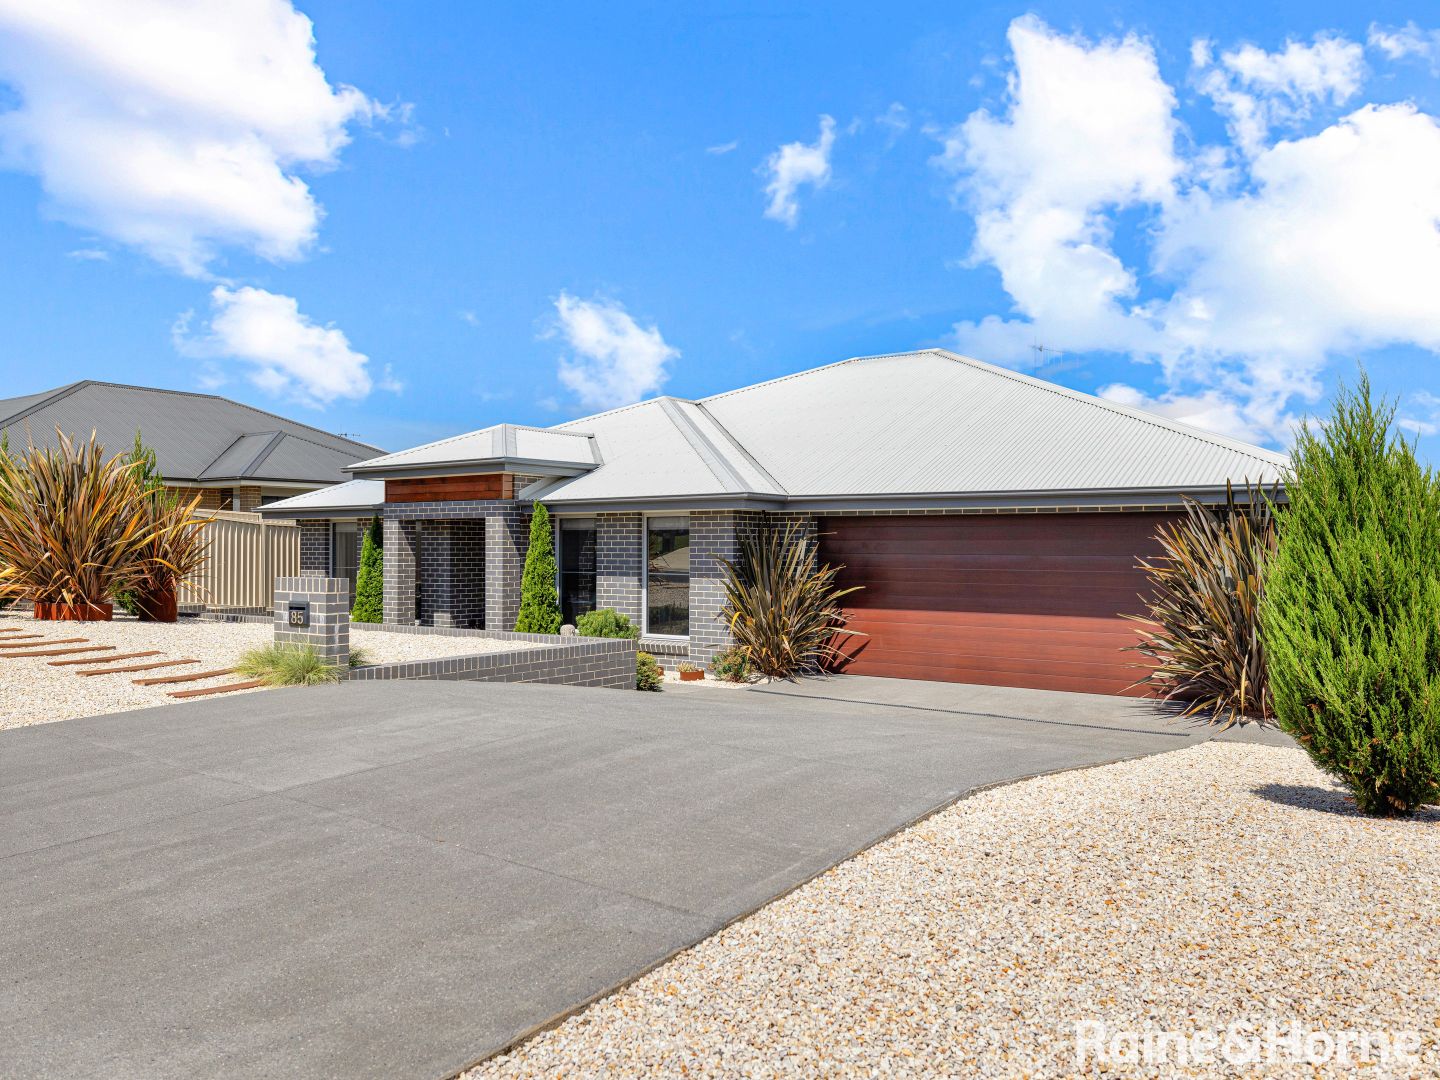 85 Wentworth Drive, Kelso NSW 2795